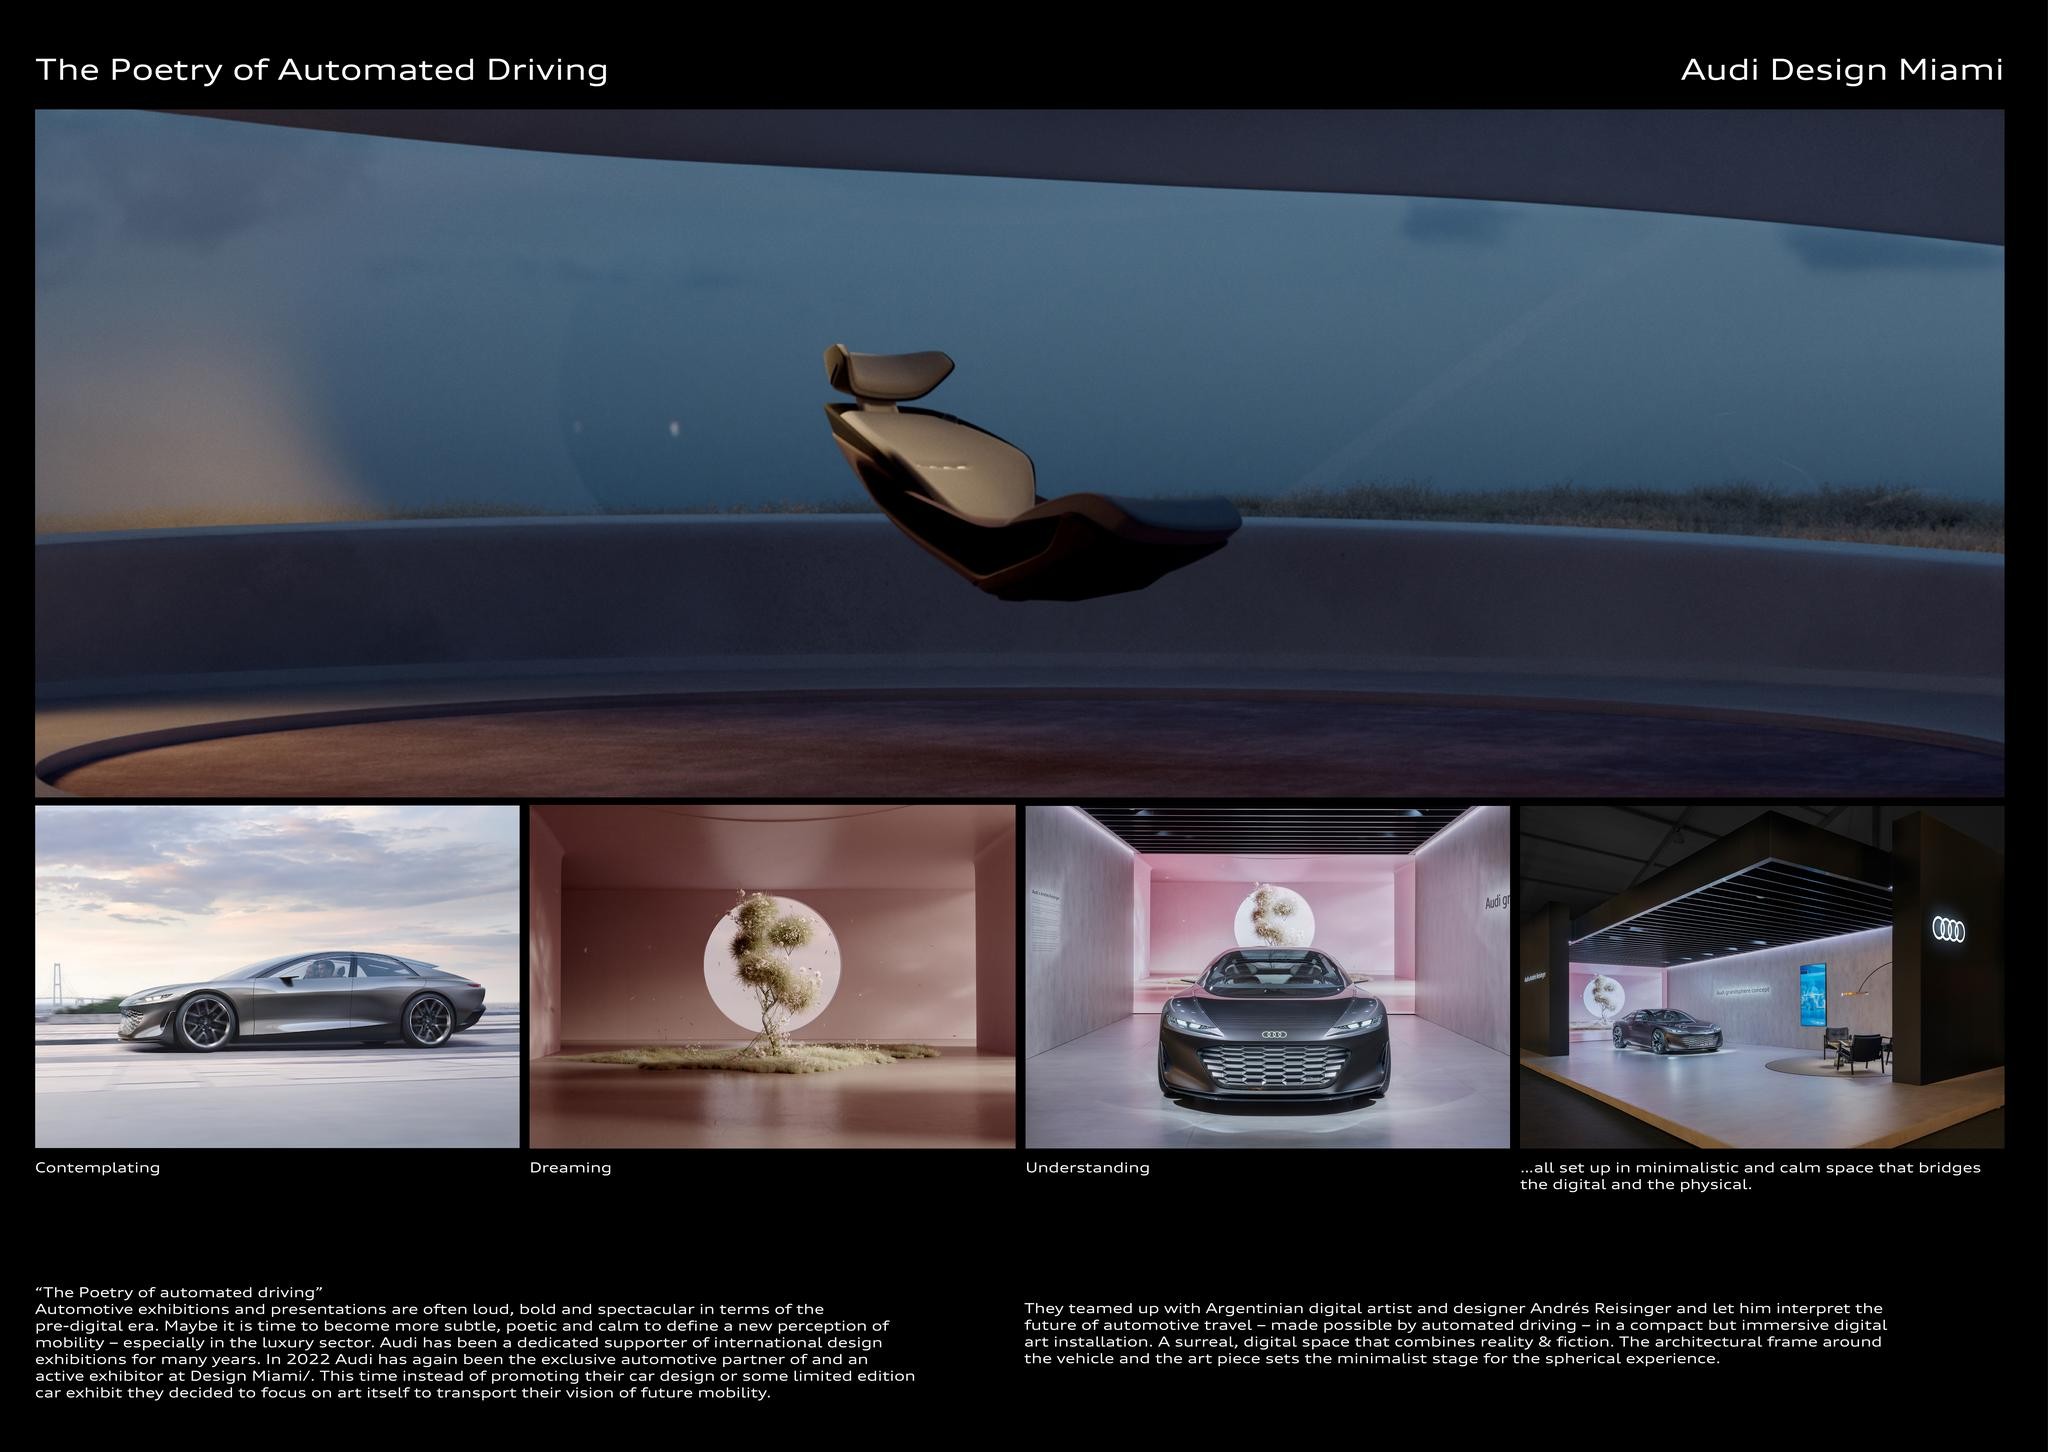 Audi "The Poetry of Automated Driving"